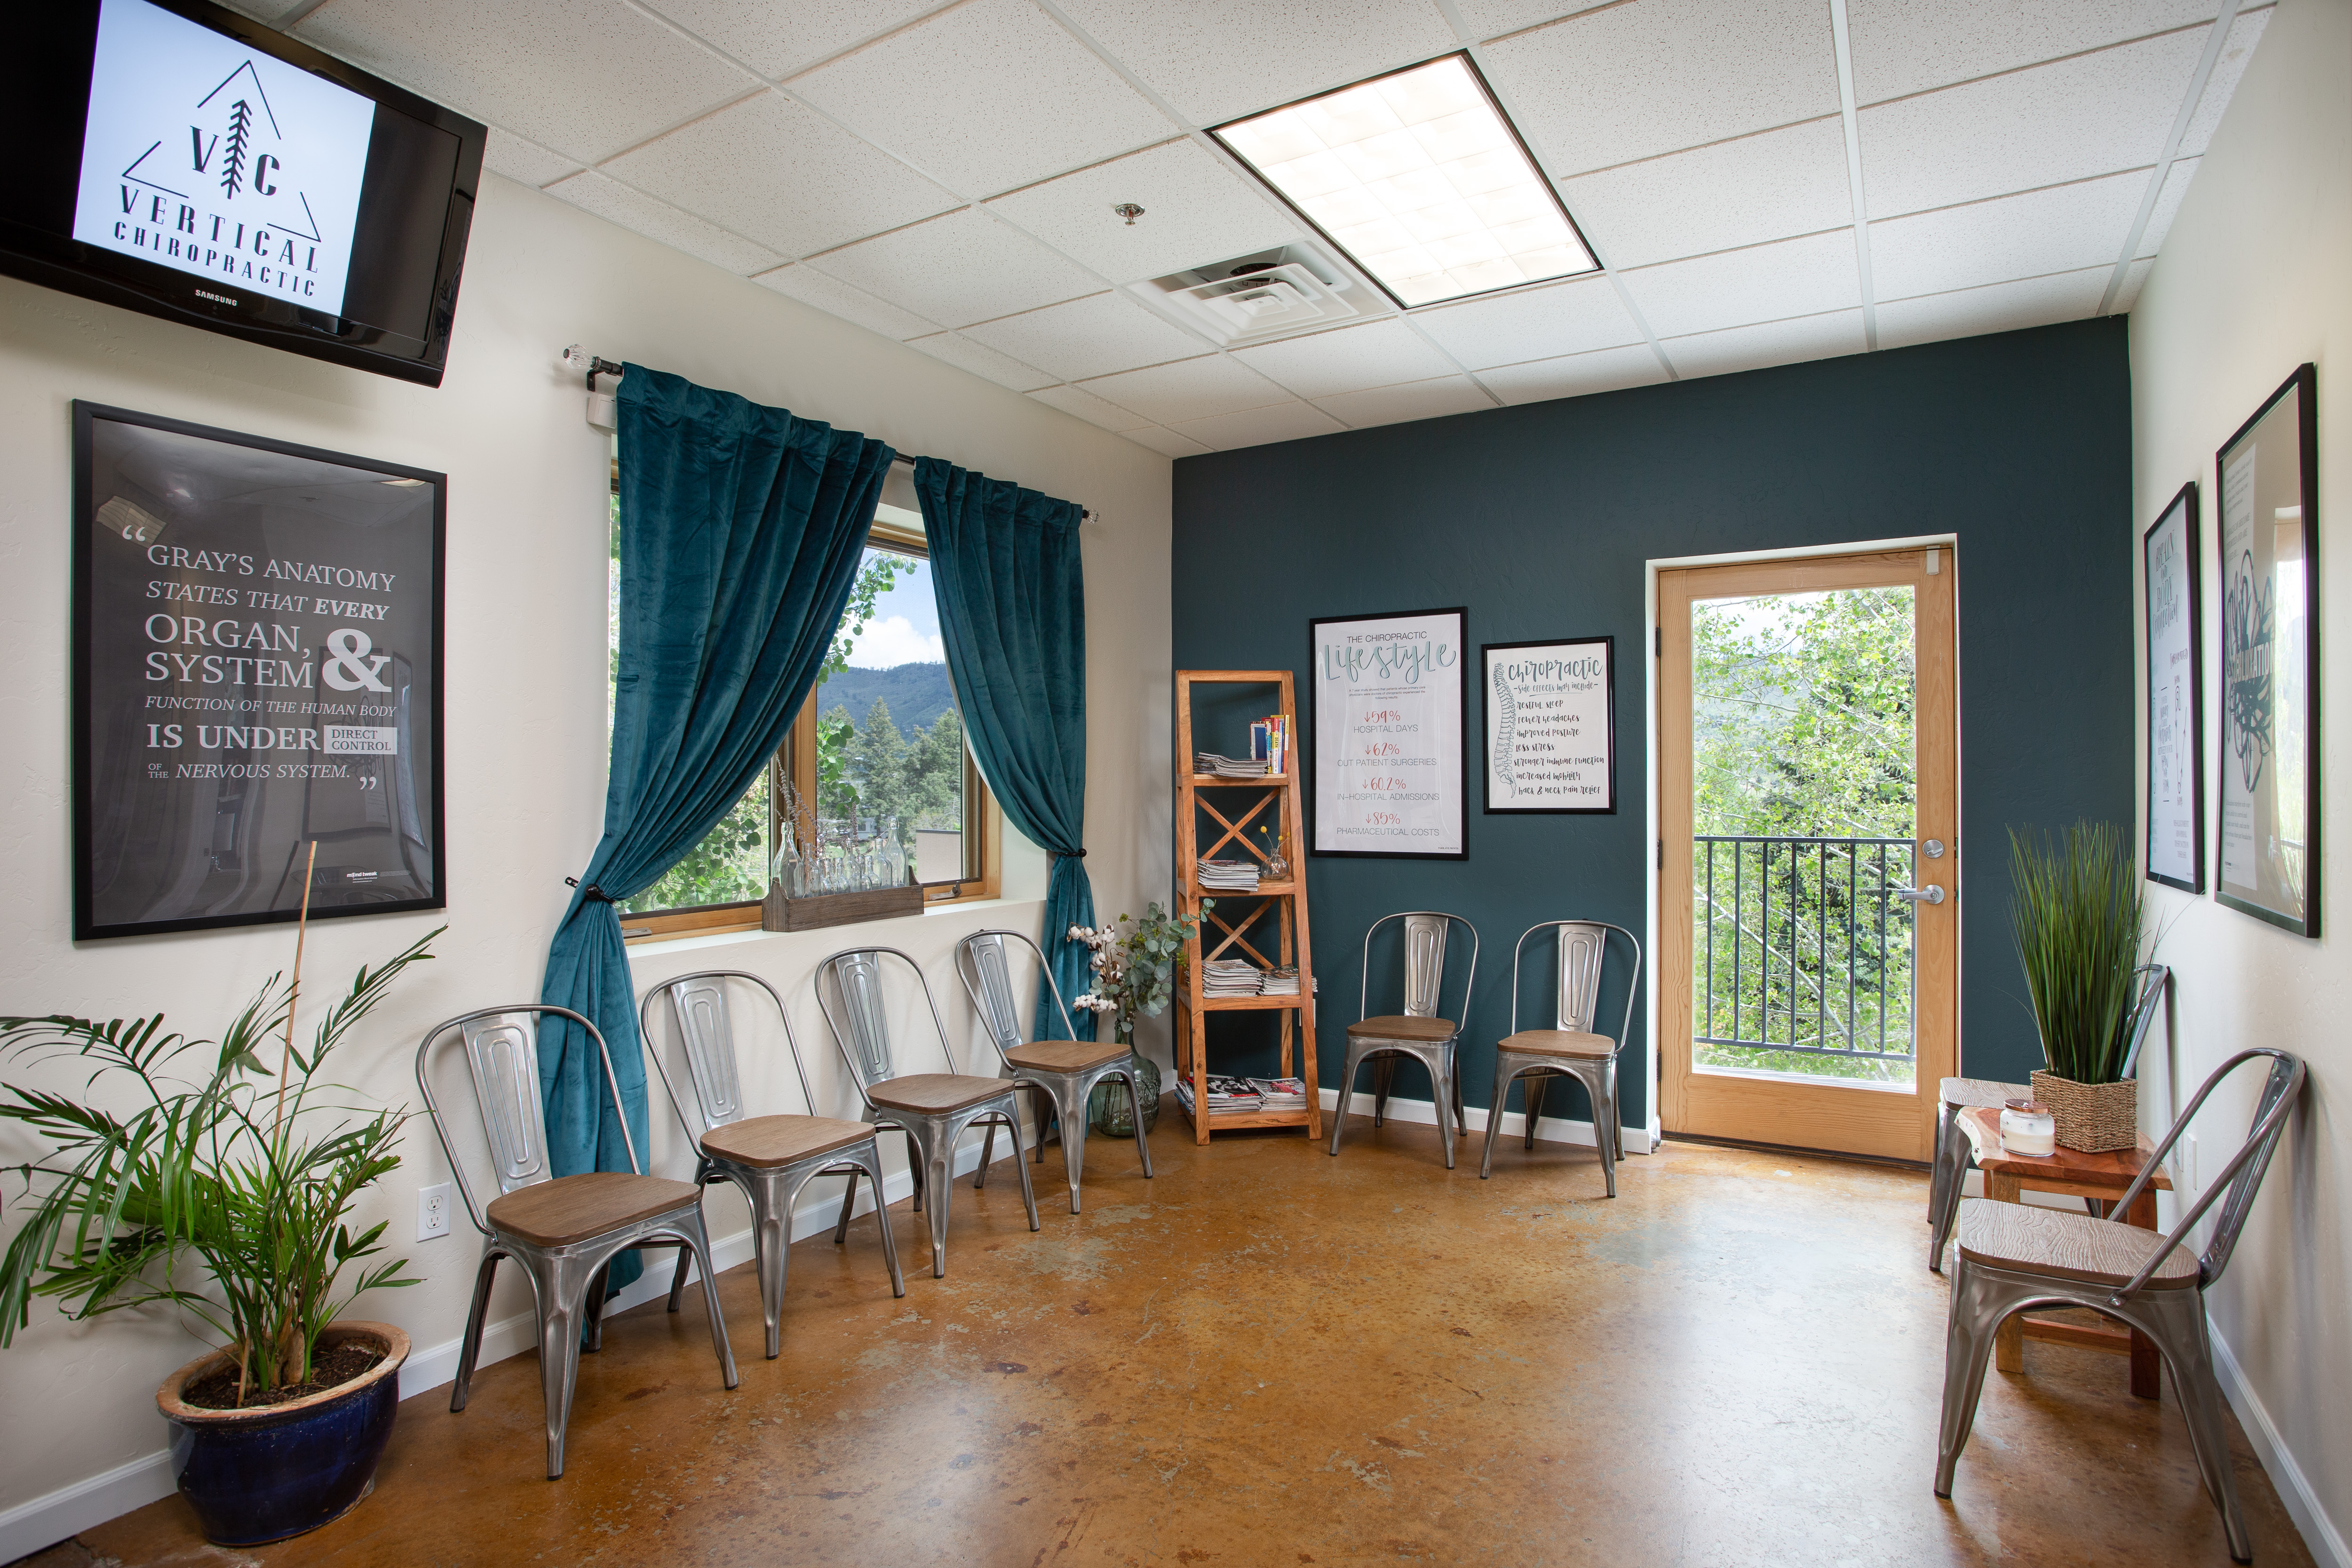 vertical chiropractic, durango, co office, chiropractic appointment, tranquil office, waiting room, back pain relief, headache relief, gonstead chiropractor